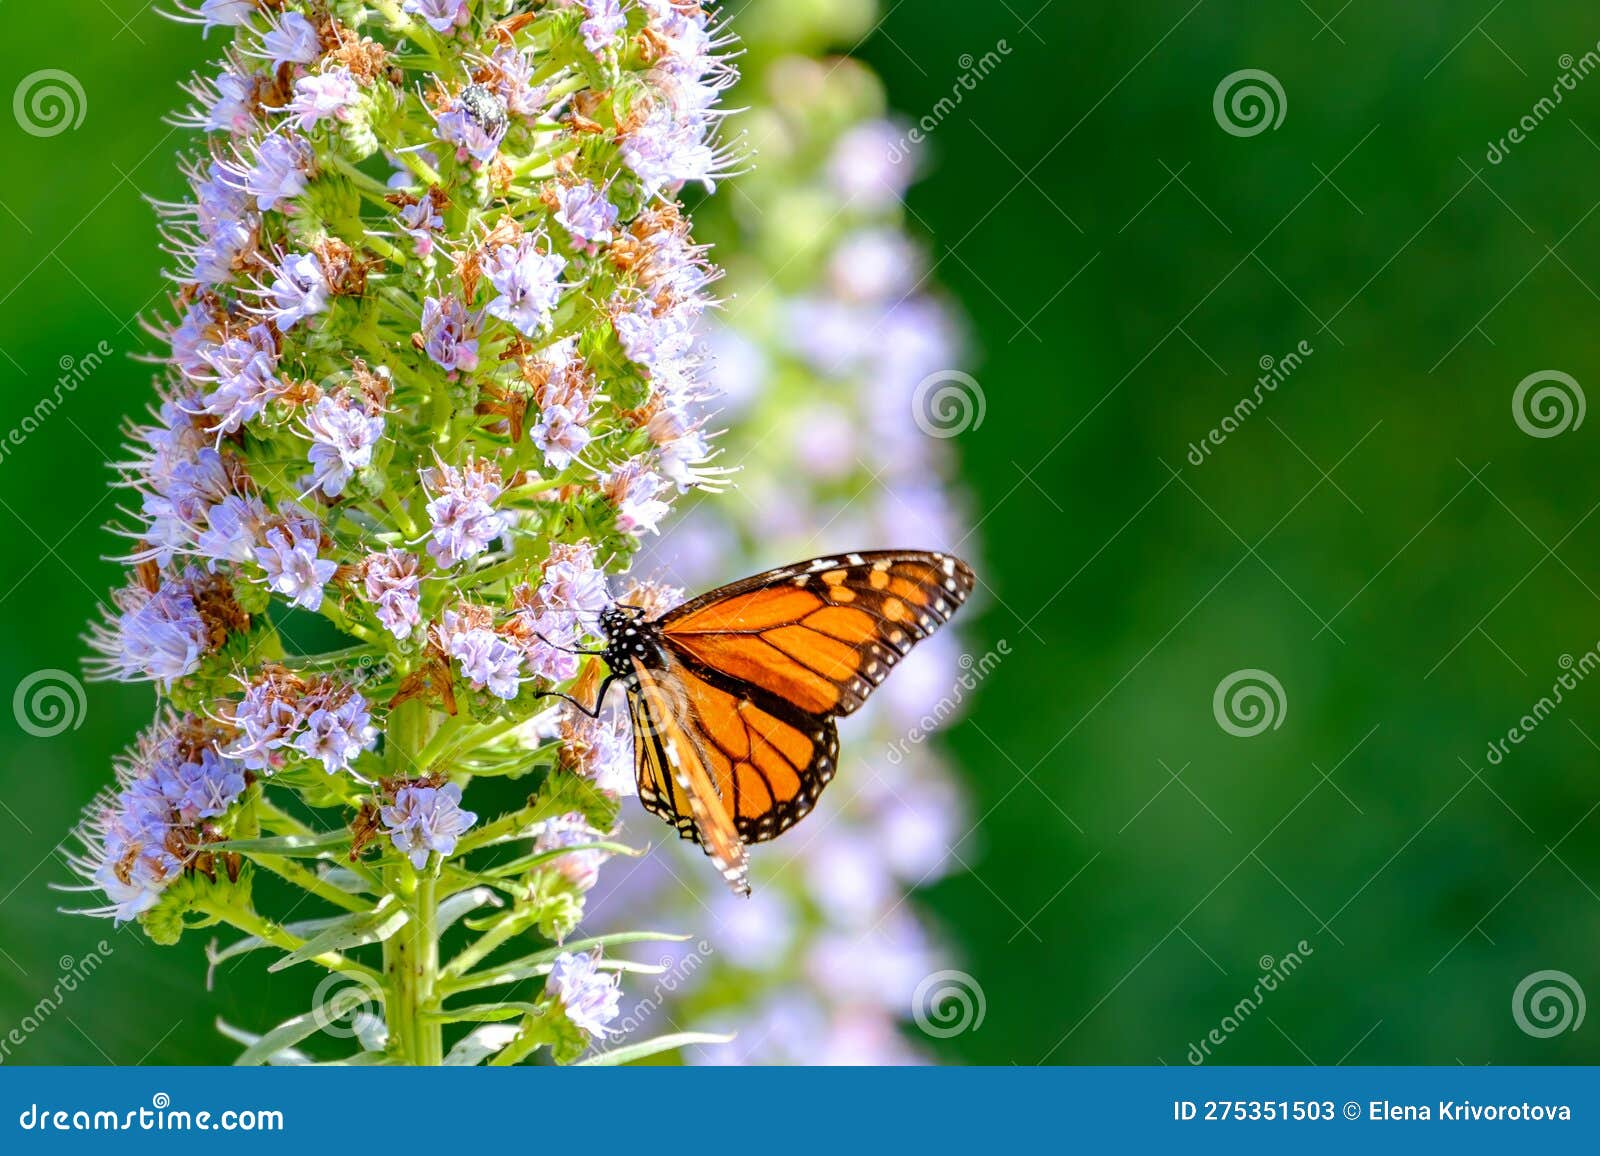 monarch butterfly (danaus plexippus) standing on the blooming oplant echium on gran canary, spain